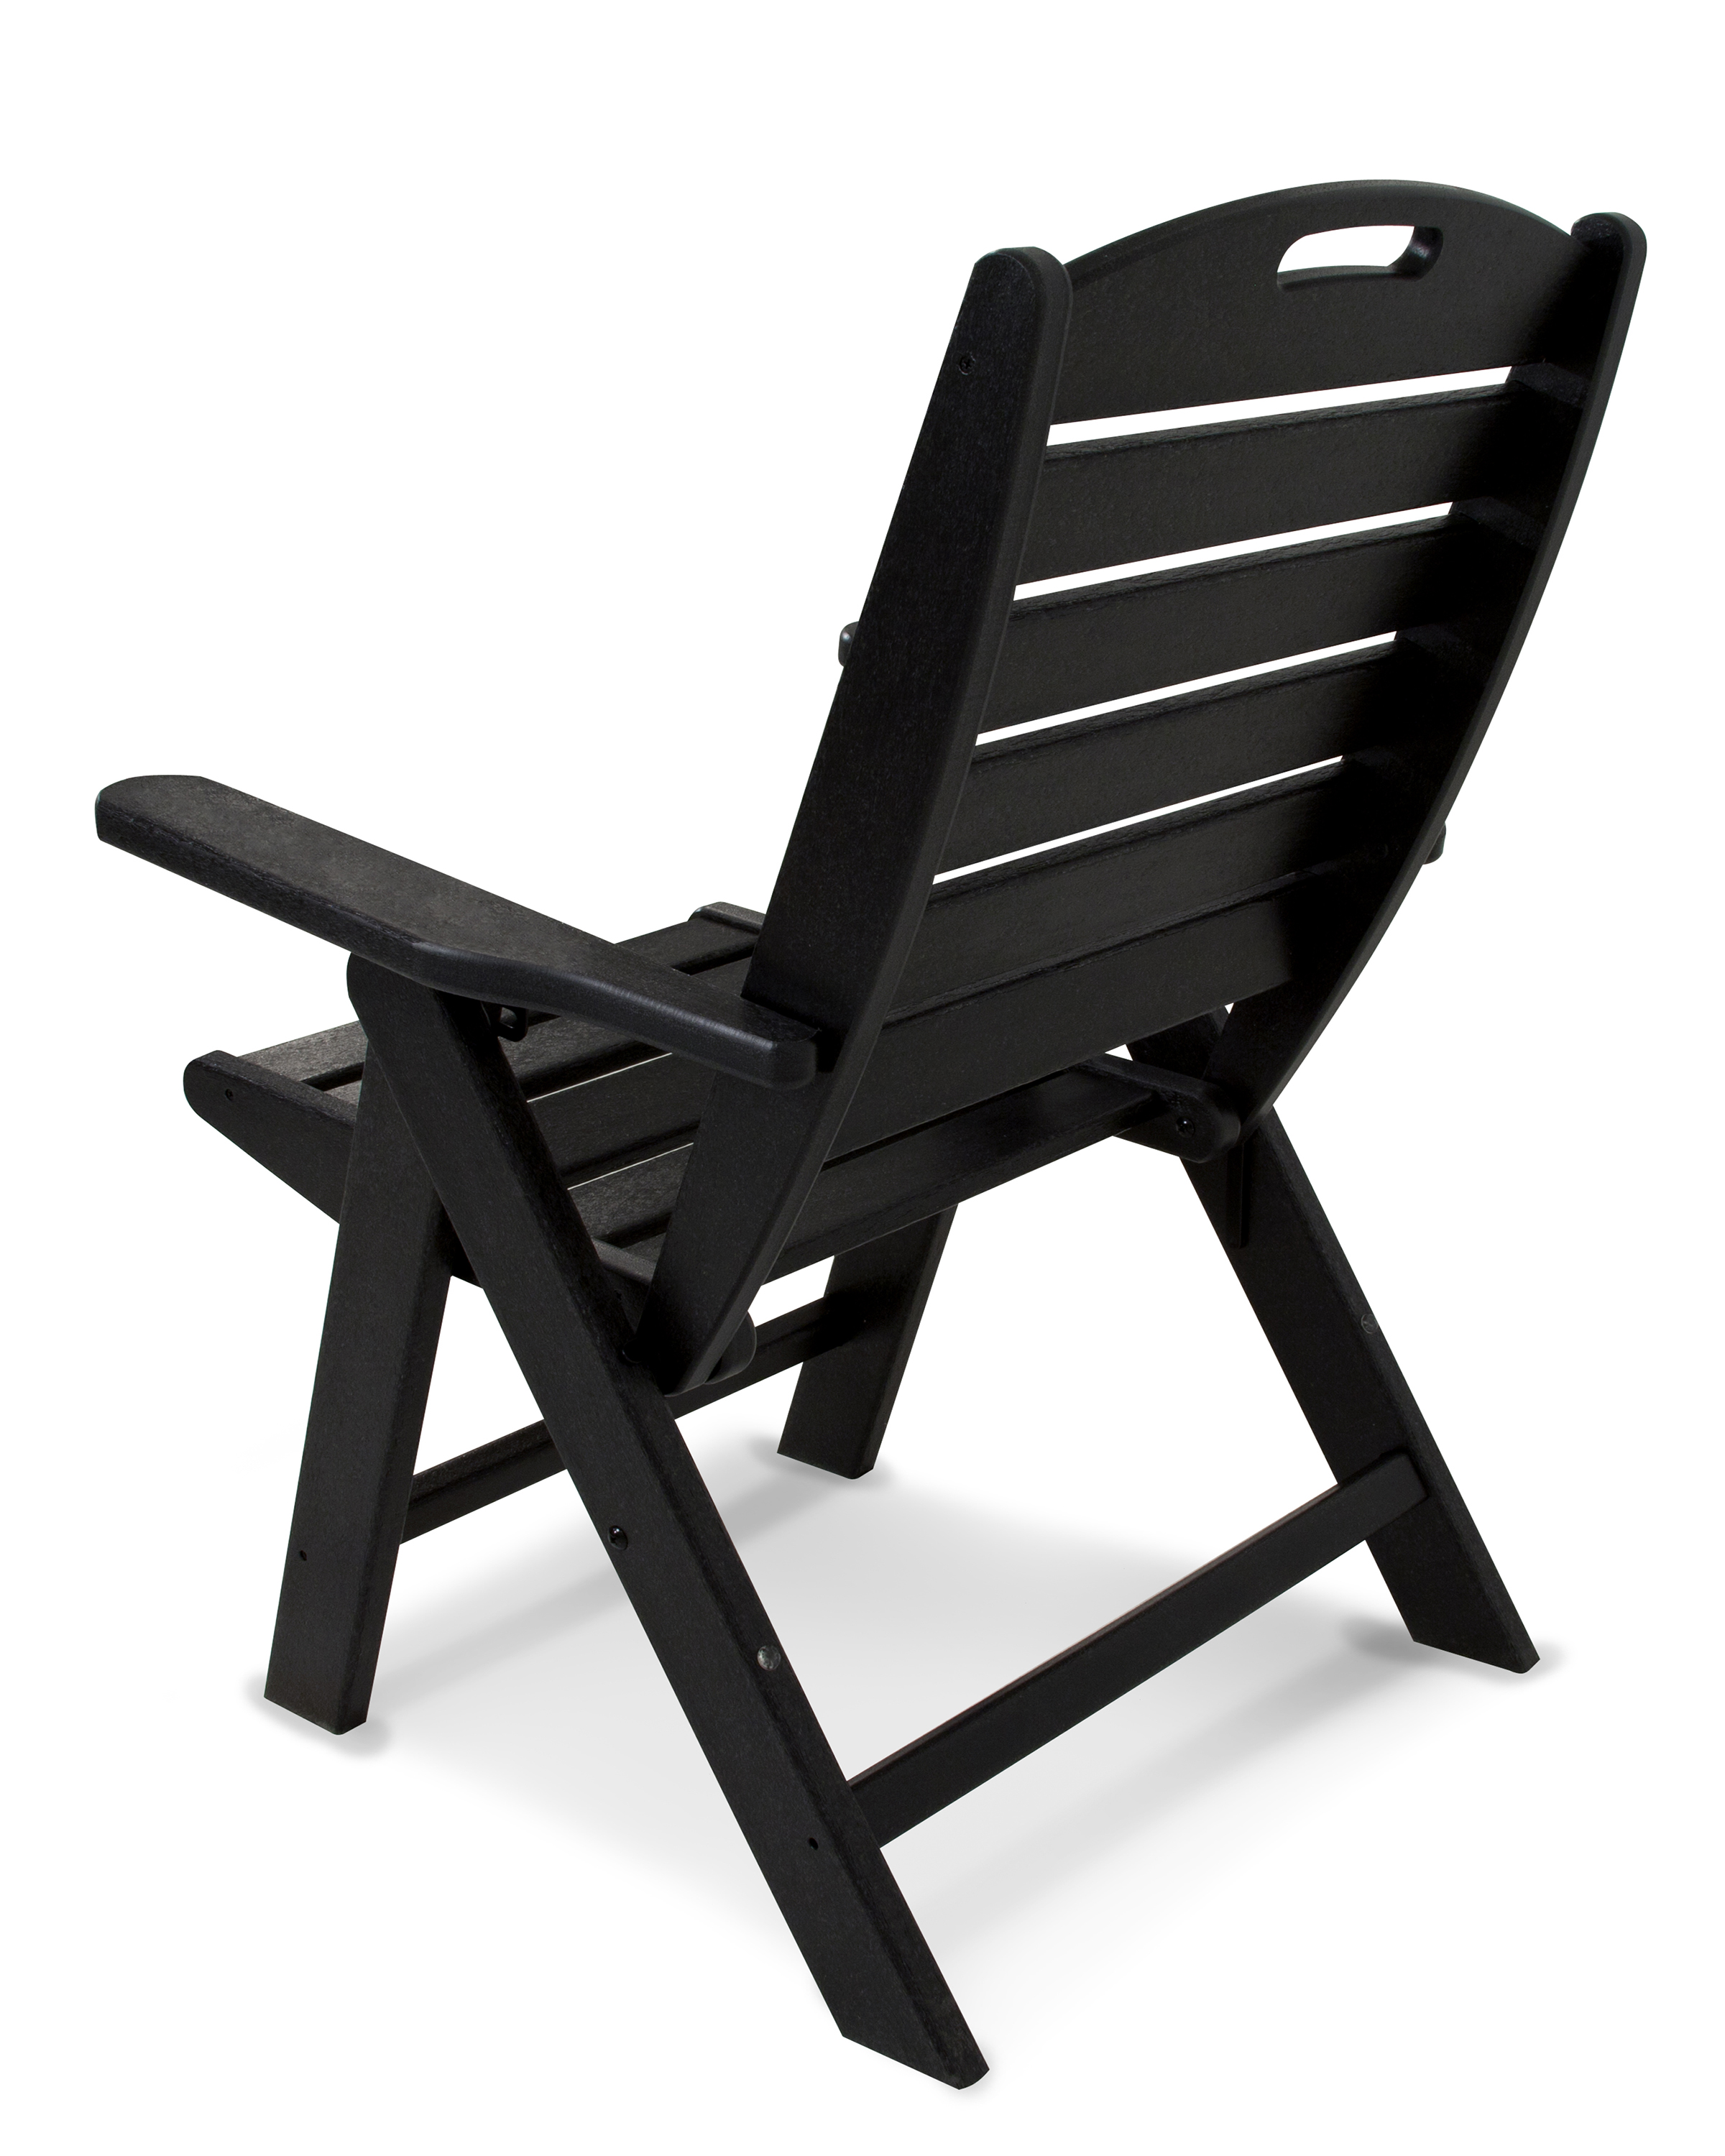 Immerse Yourself In An Outdoor Chair That Pampers You With A Comfortably Contoured Seat And A High, Adjustable Back. The Polywood